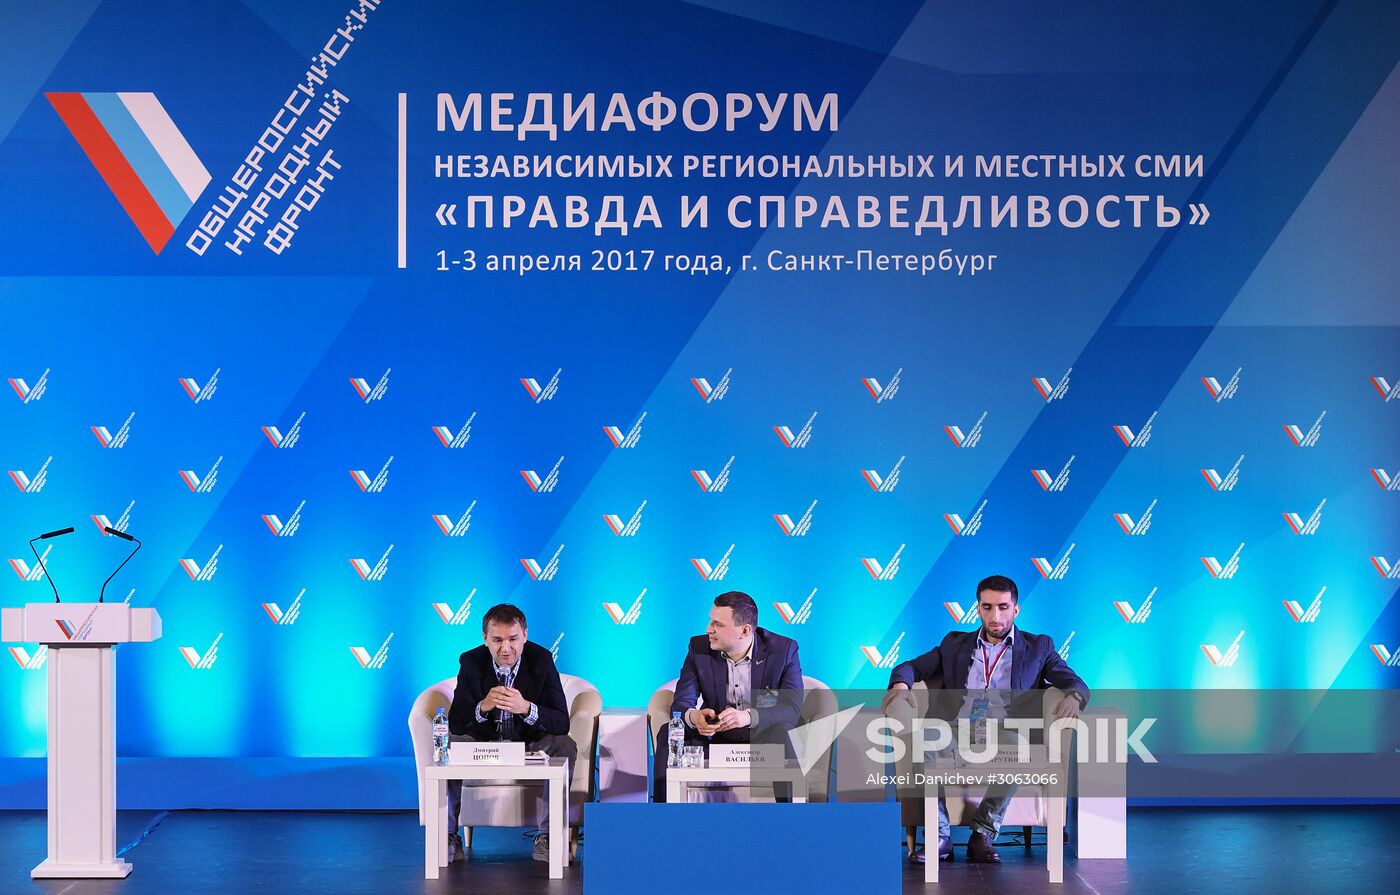 Truth and Justice regional and local media forum in St. Petersburg